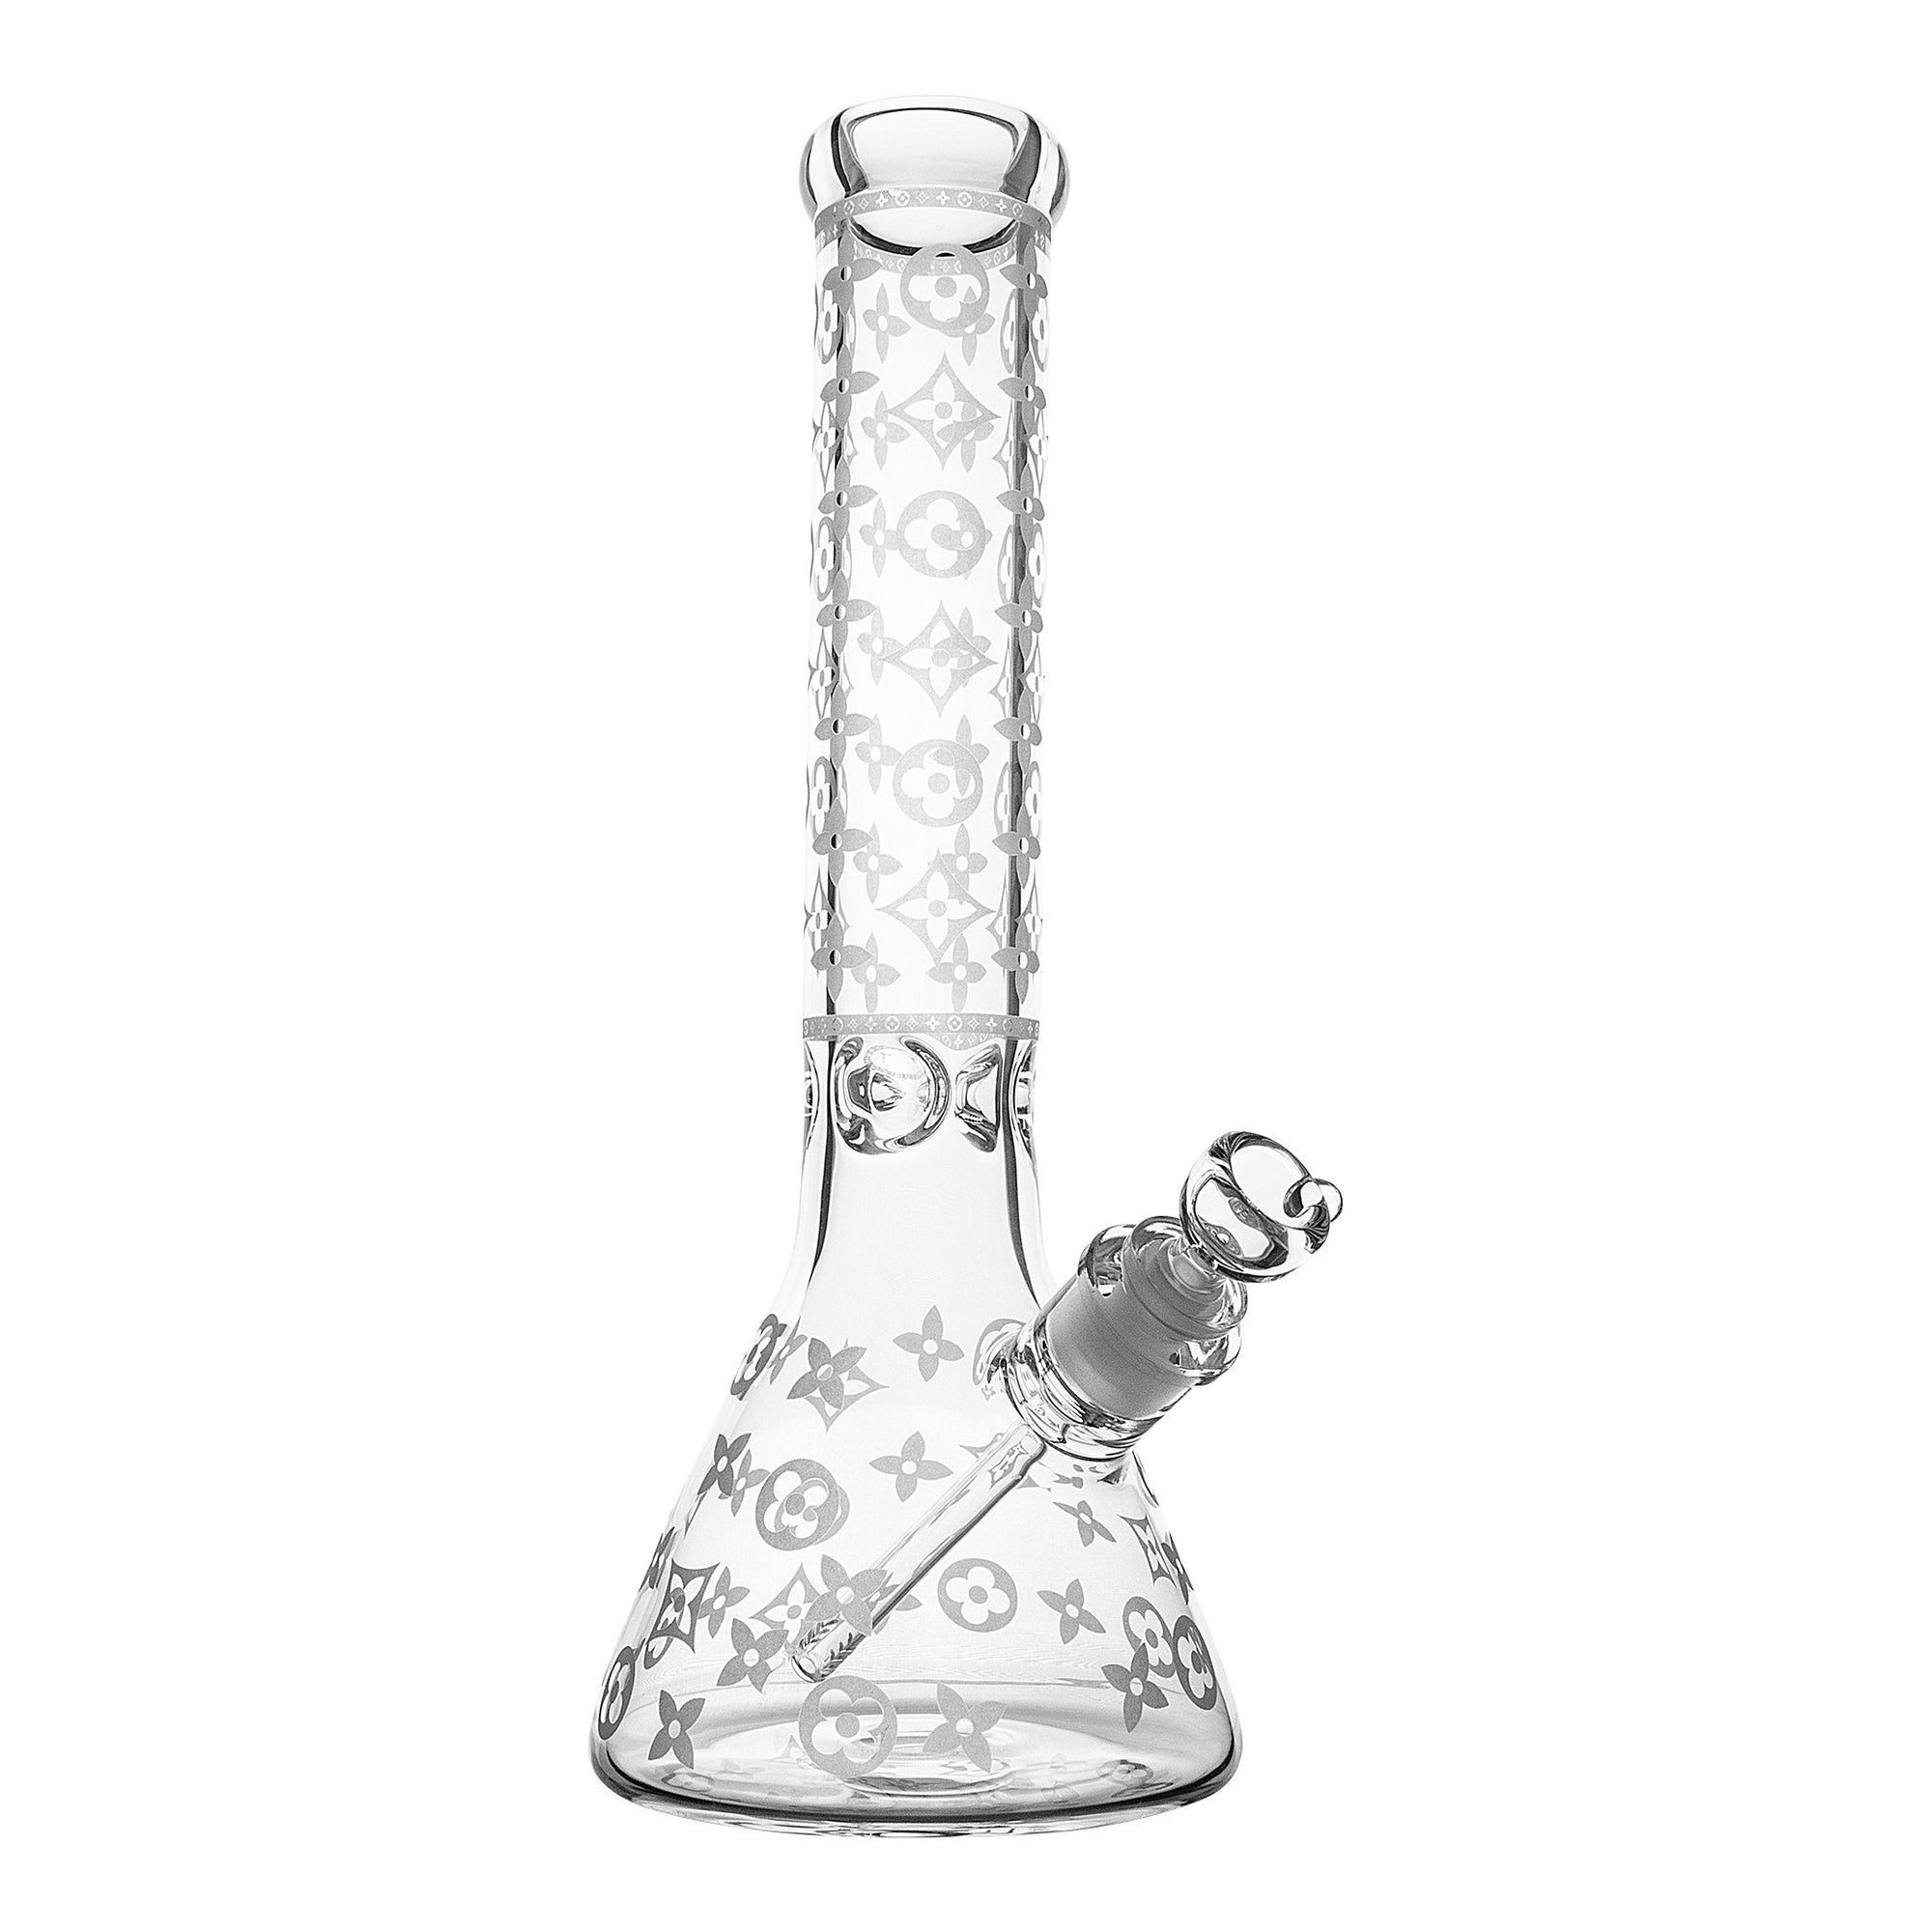 Bongs & Bubblers for only $4.20 | Everything For 420